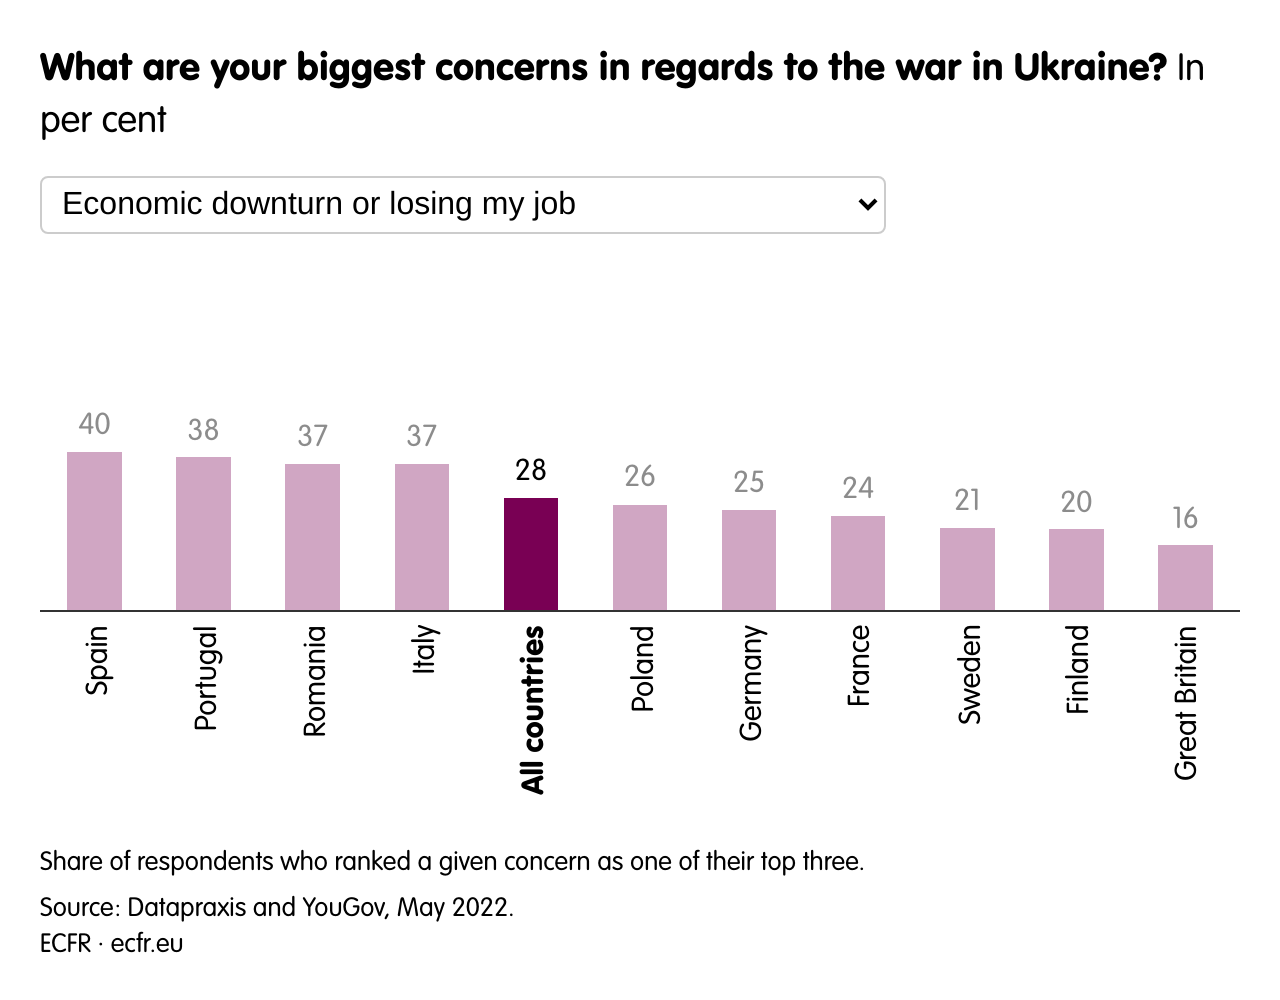 What are your biggest concerns in regards to the war in Ukraine? 